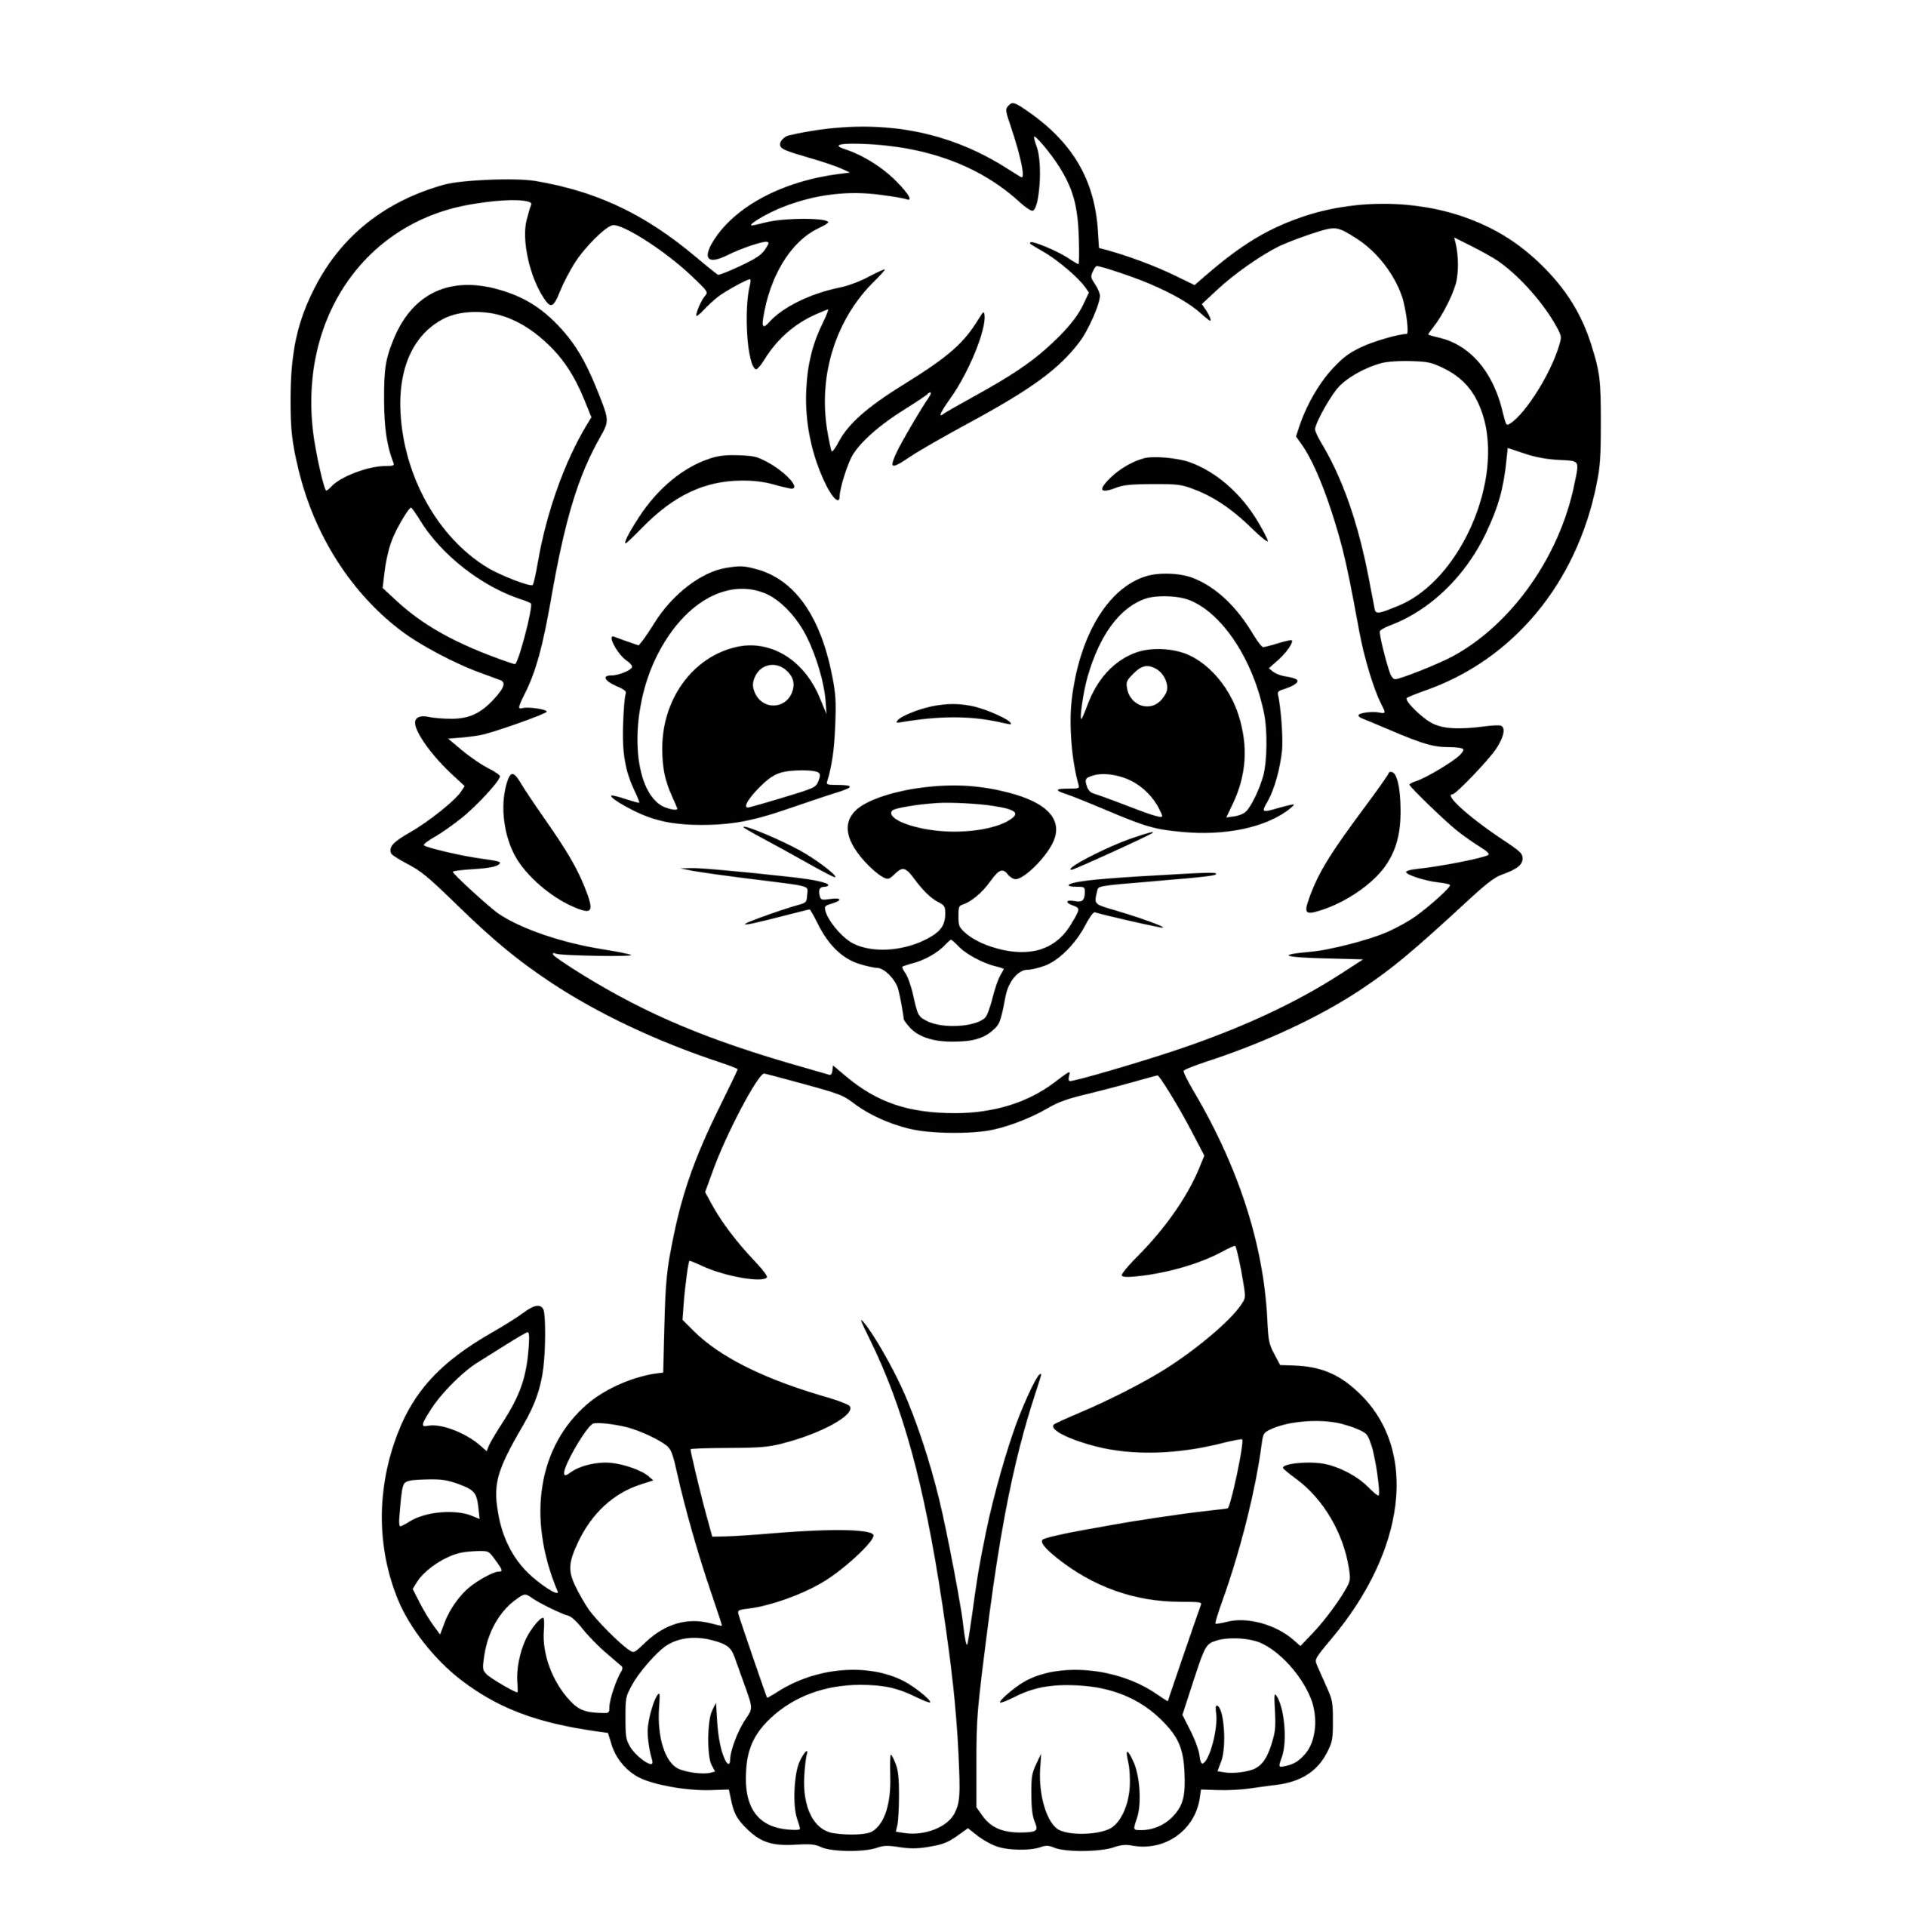 Instant Download SVG File: Baby Jungle Cat for Cricut, Silhouette